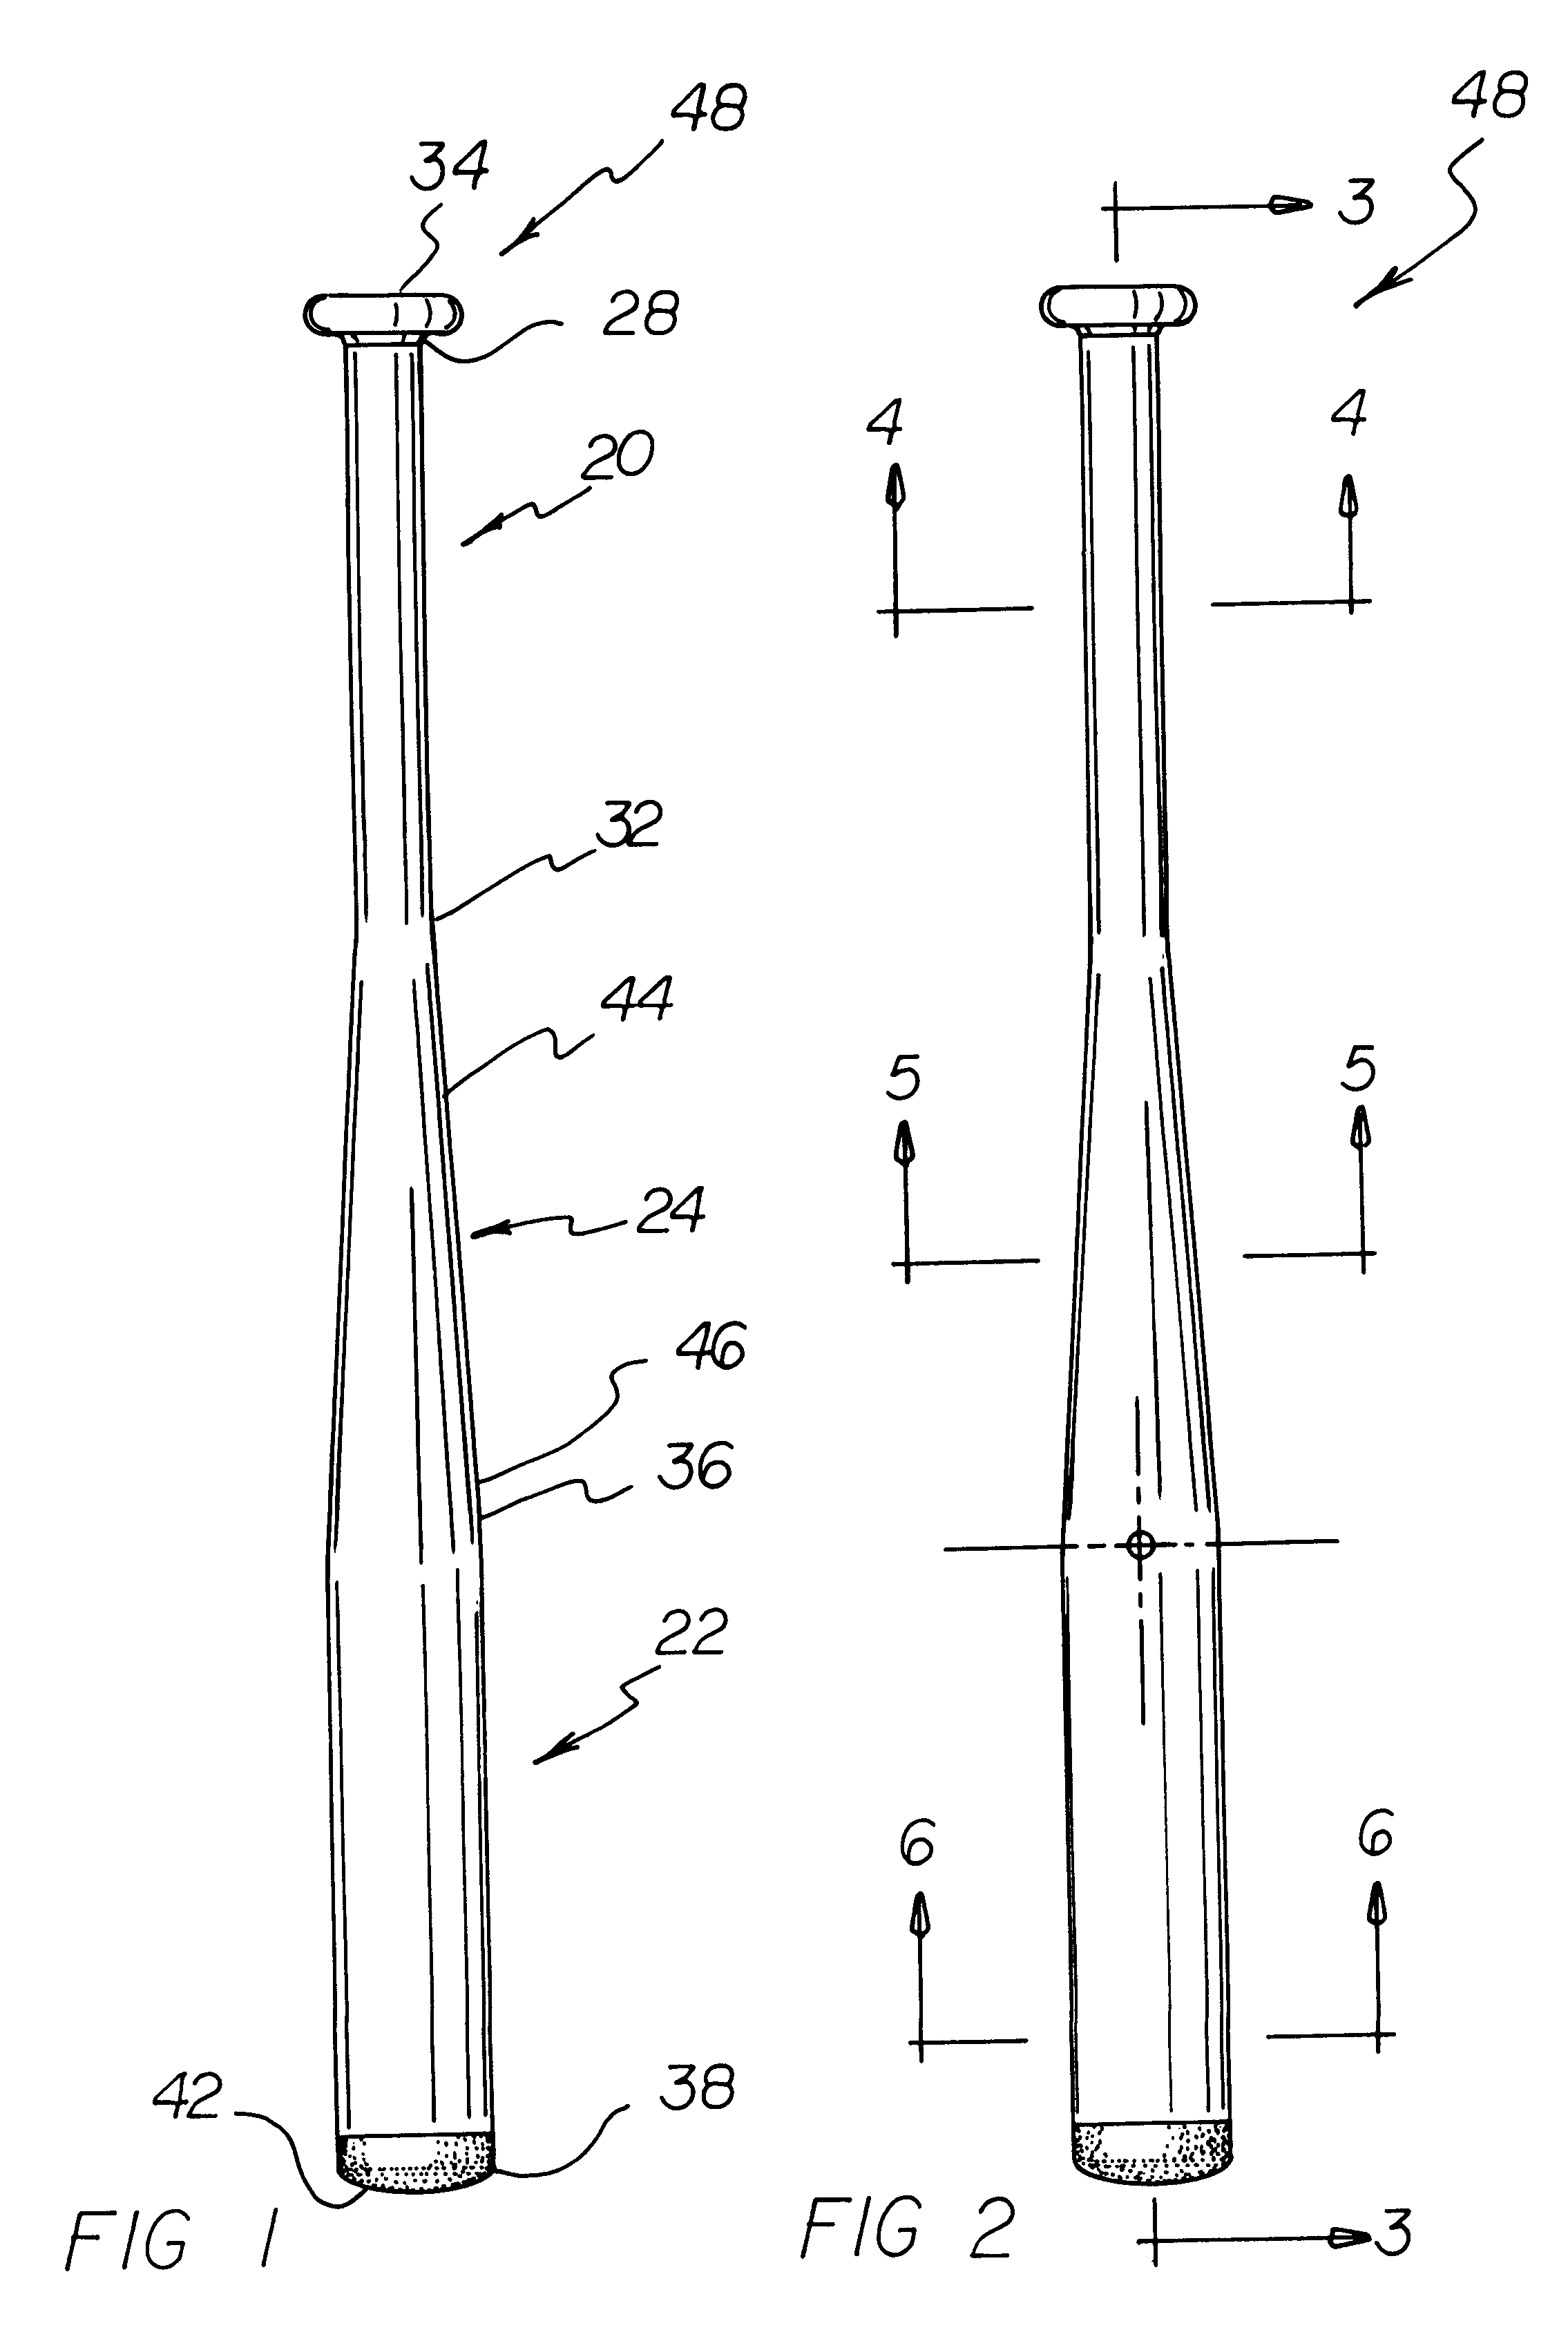 Bat with high moment of inertia to weight ratio and method of fabrication